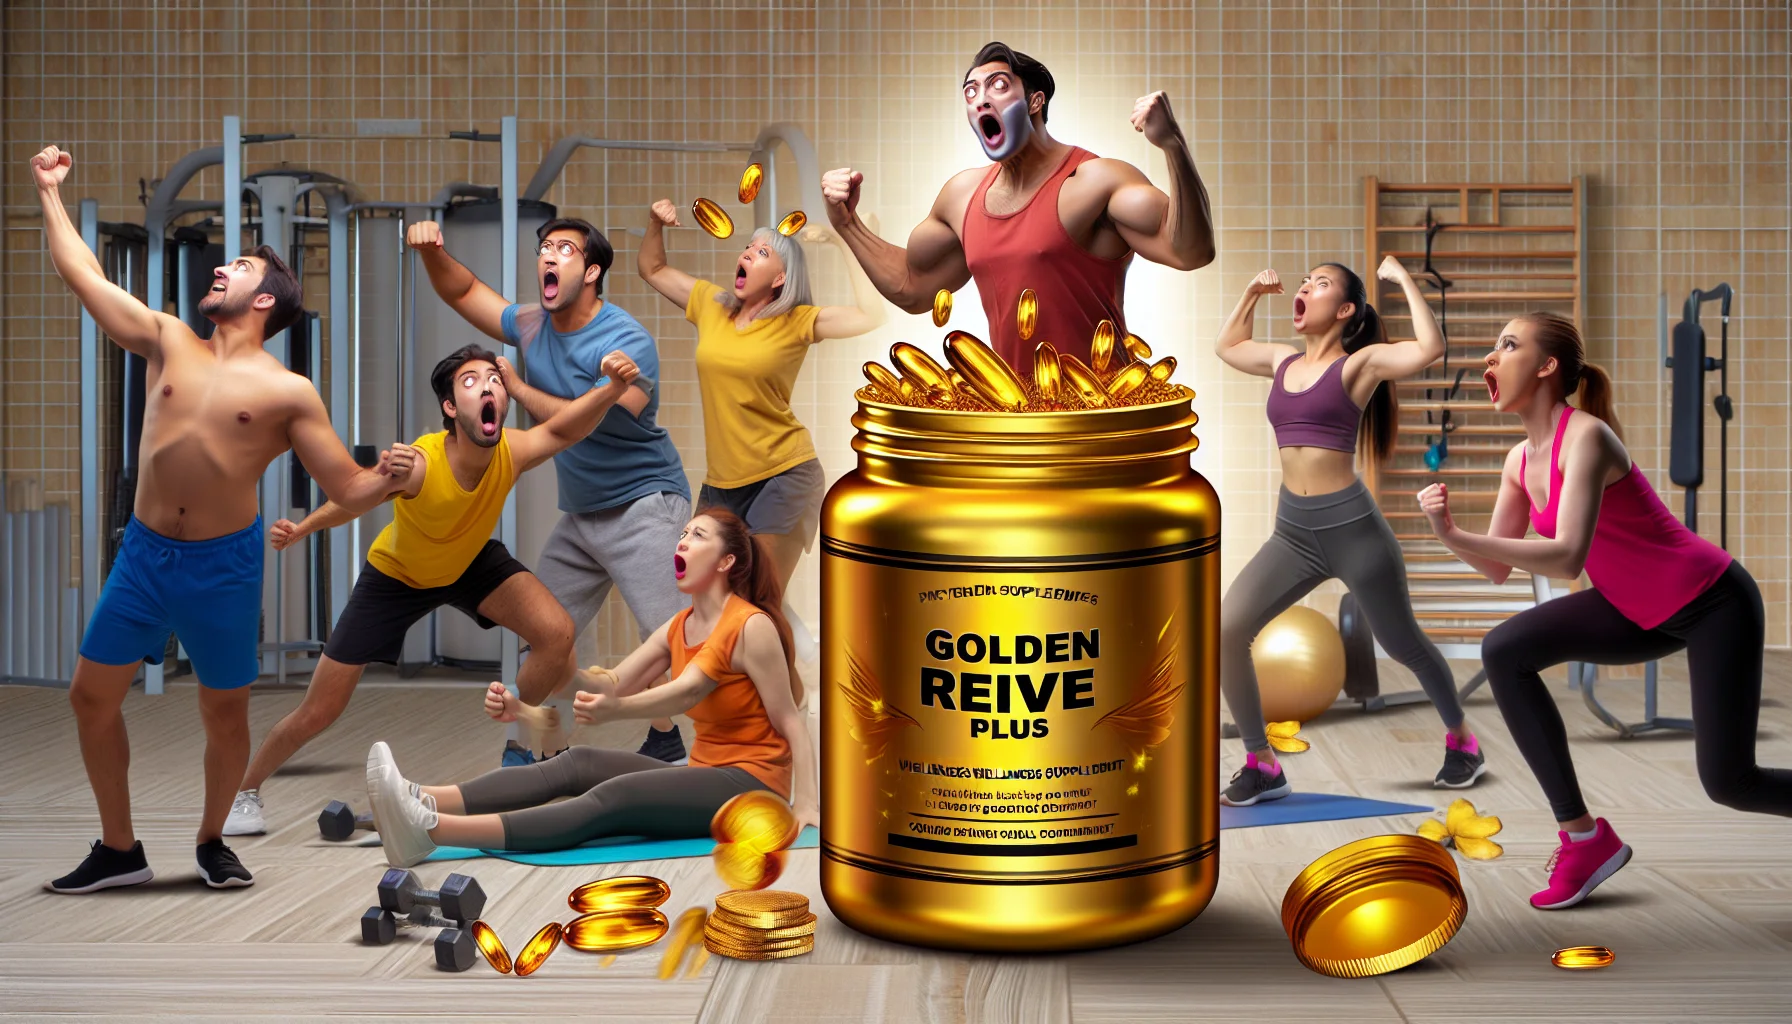 Devise an entertaining scene that encourages physical fitness, featuring a creatively designed, golden-hued container of a fictional wellness supplement called 'Golden Revive Plus' by a character named Joshua Levitt. In this amusing scenario, a diverse group of people of different descents and genders are engaging in various types of exercises. They react hilariously to the energetic effects of the supplement, showcasing exaggerated poses, strengths, and athletic abilities.